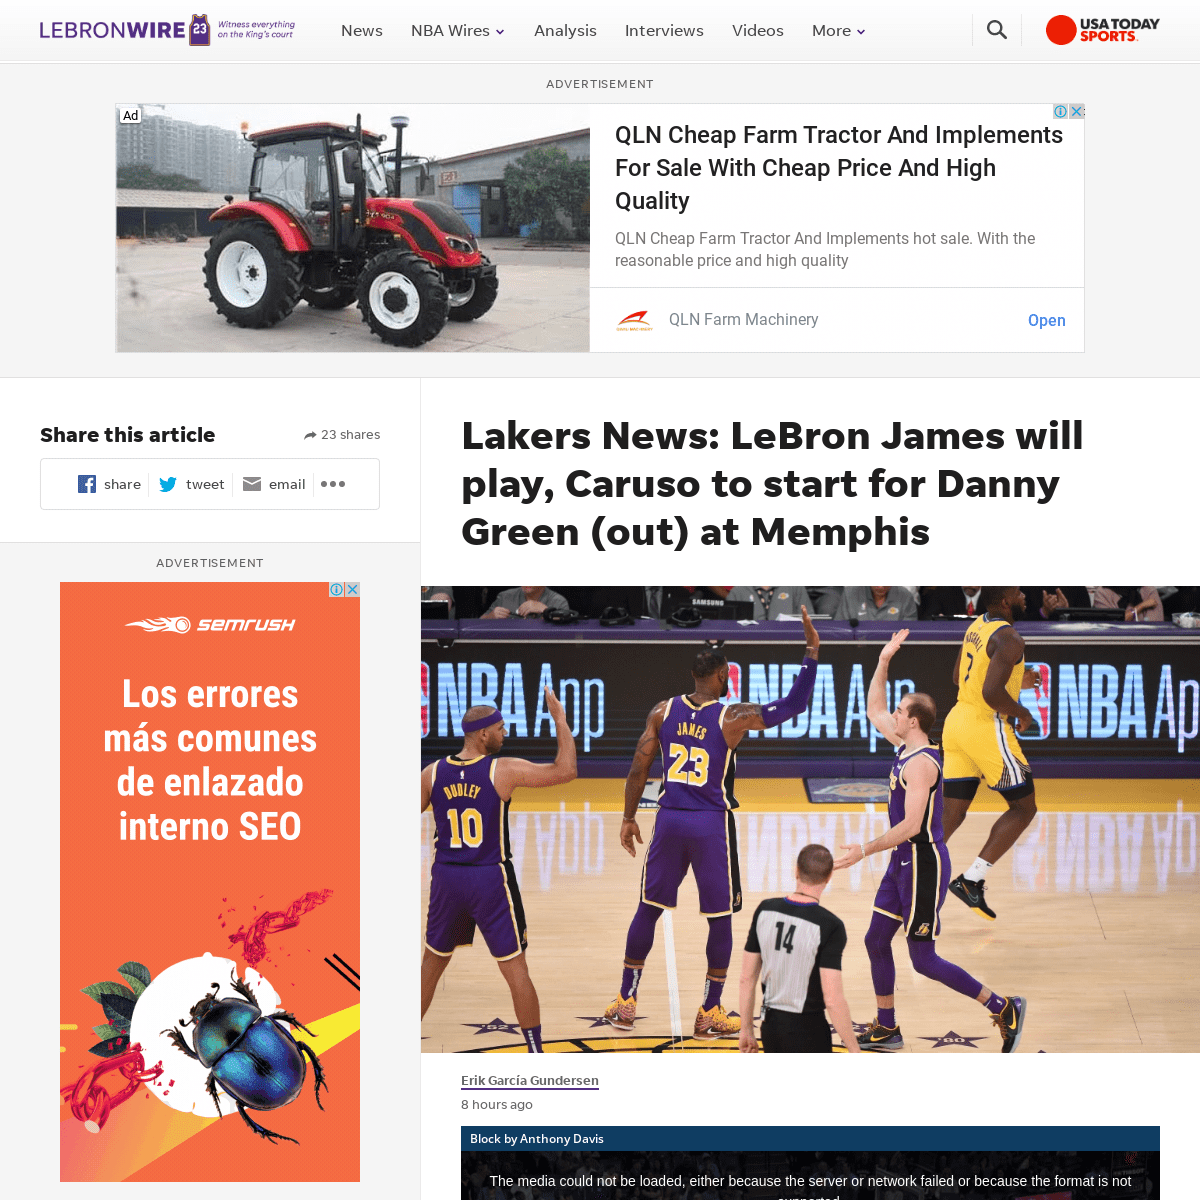 A complete backup of lebronwire.usatoday.com/2020/02/29/lakers-news-lebron-james-will-play-caruso-to-start-for-danny-green-out-a